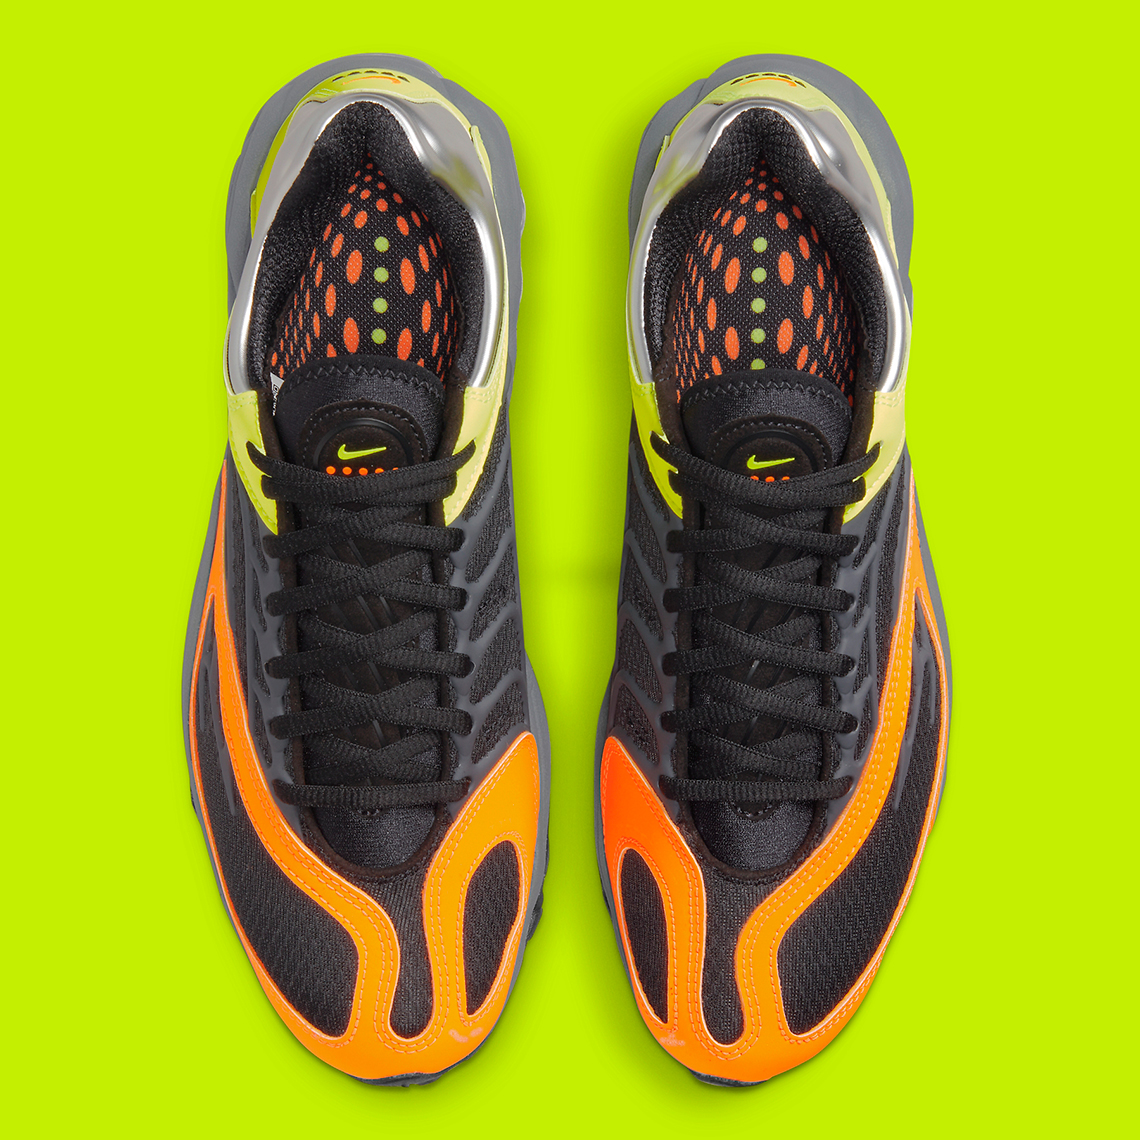 nike air tuned max volt orange grey dh4793 700 release date 4